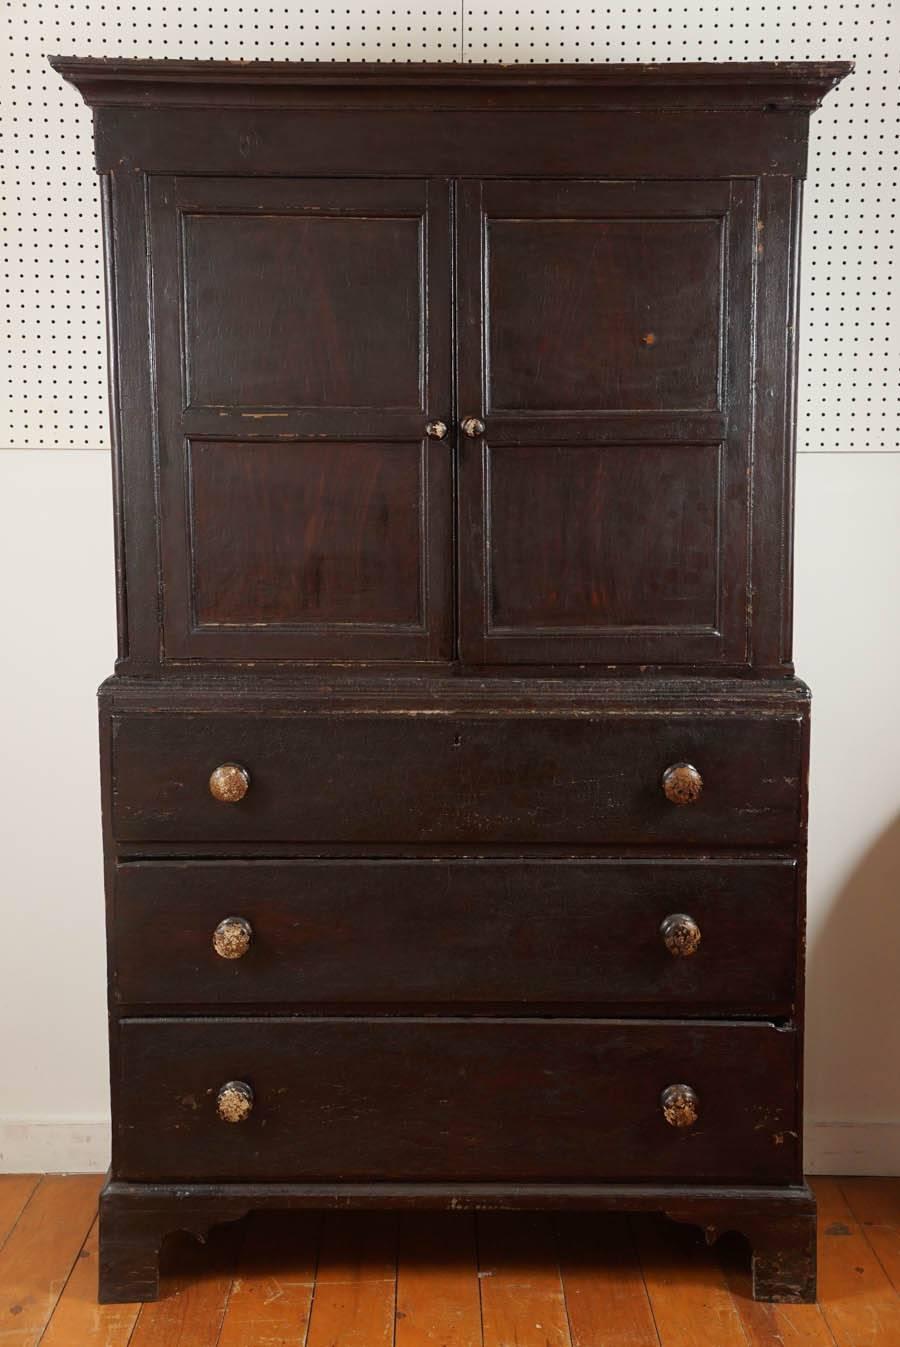 This absolutely original Welsh cupboard is a fabulous find. The two-paneled doors open to a divided cupboard, perfect for storage or a flat screen television. The three large drawers below are wonderful for clothing or linens. This piece is clean